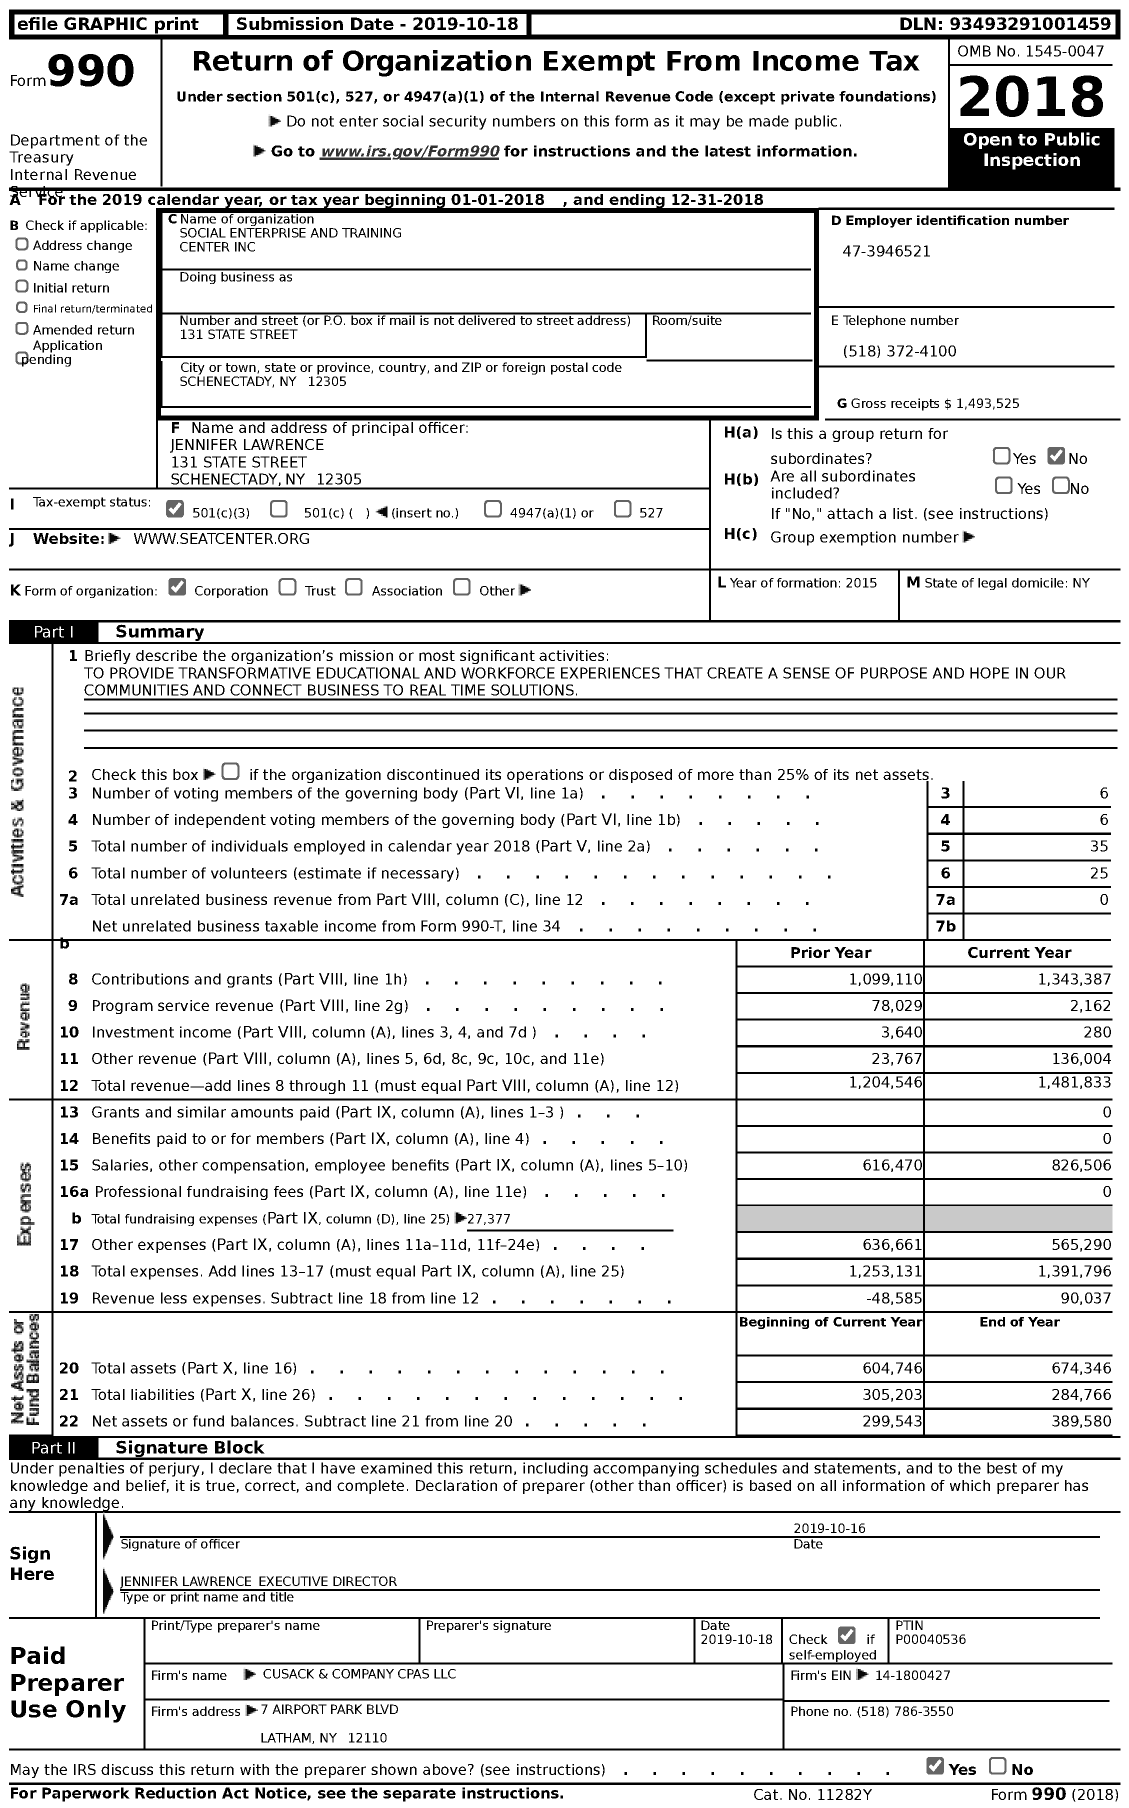 Image of first page of 2018 Form 990 for Social Enterprise and Training Center